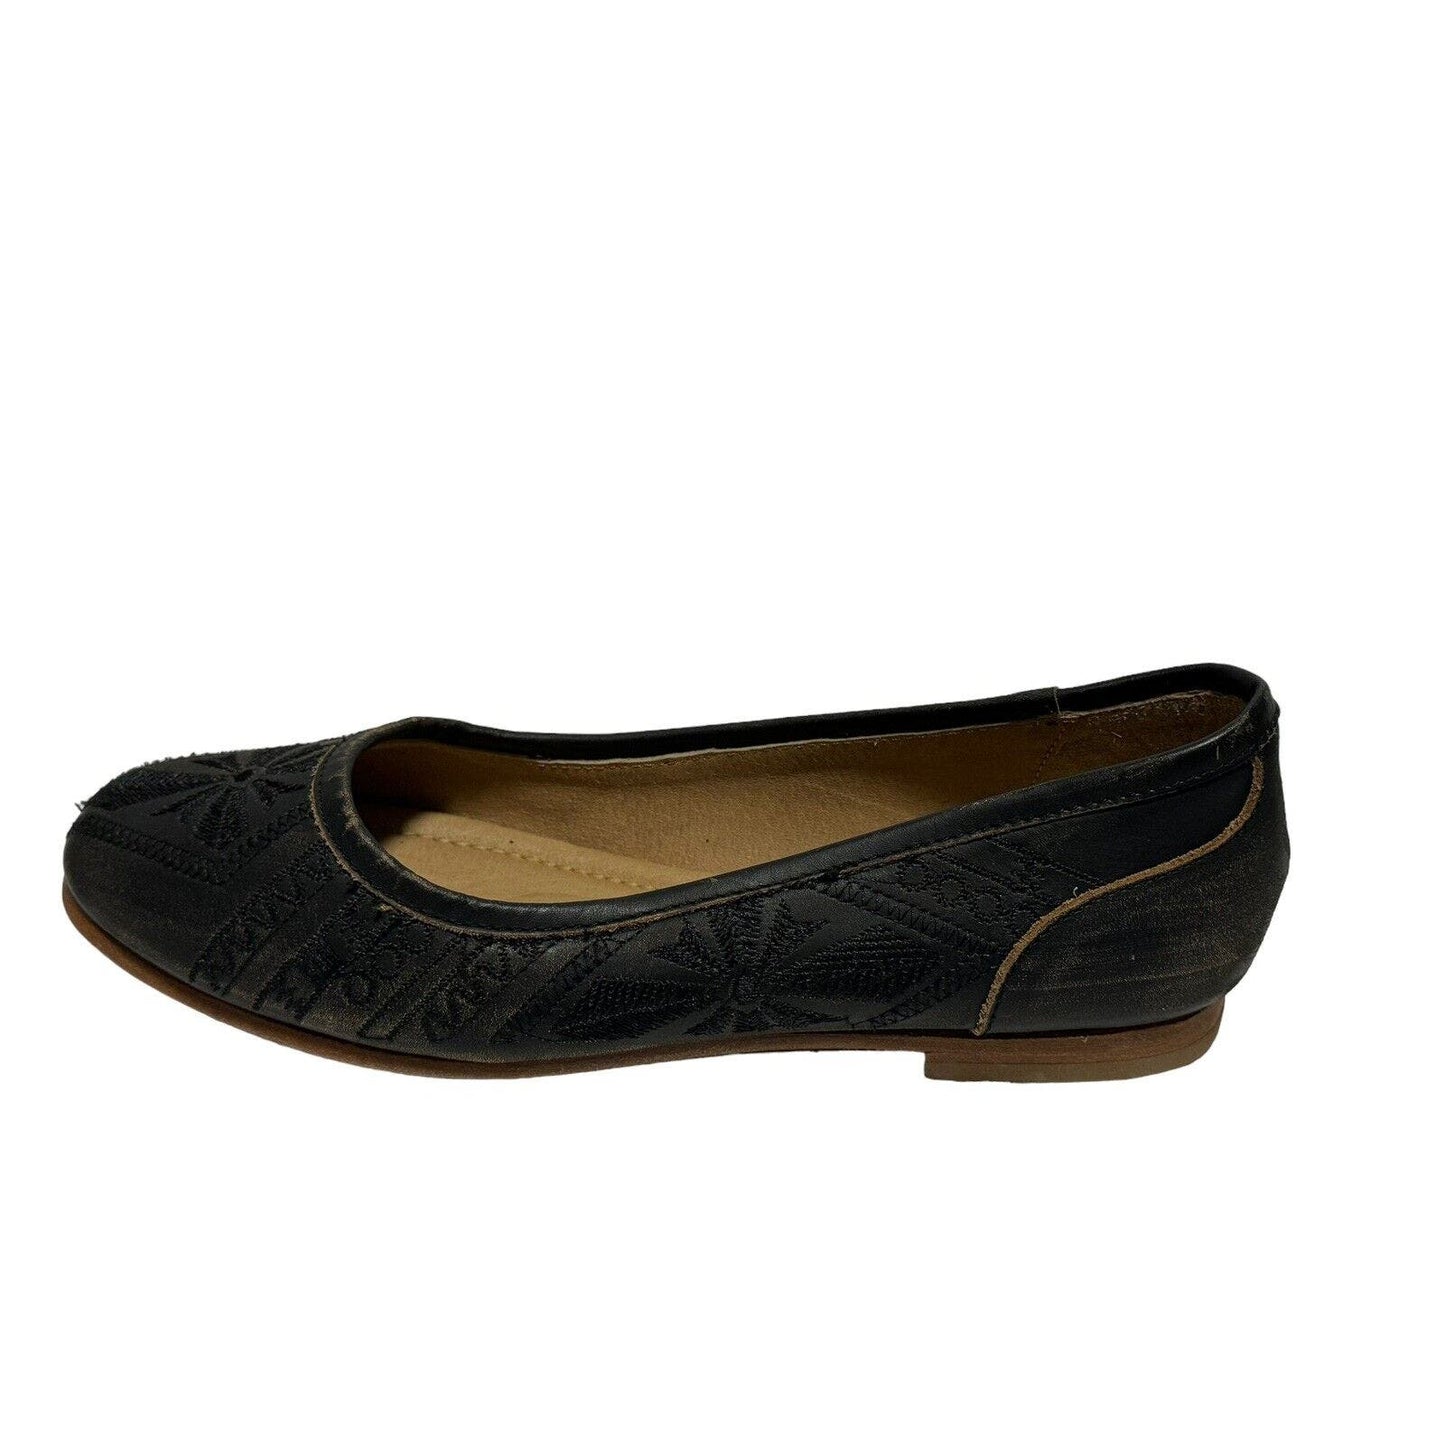 Musse & Cloud Kendal Black Distressed and Embroidered Flats Womens Size 8